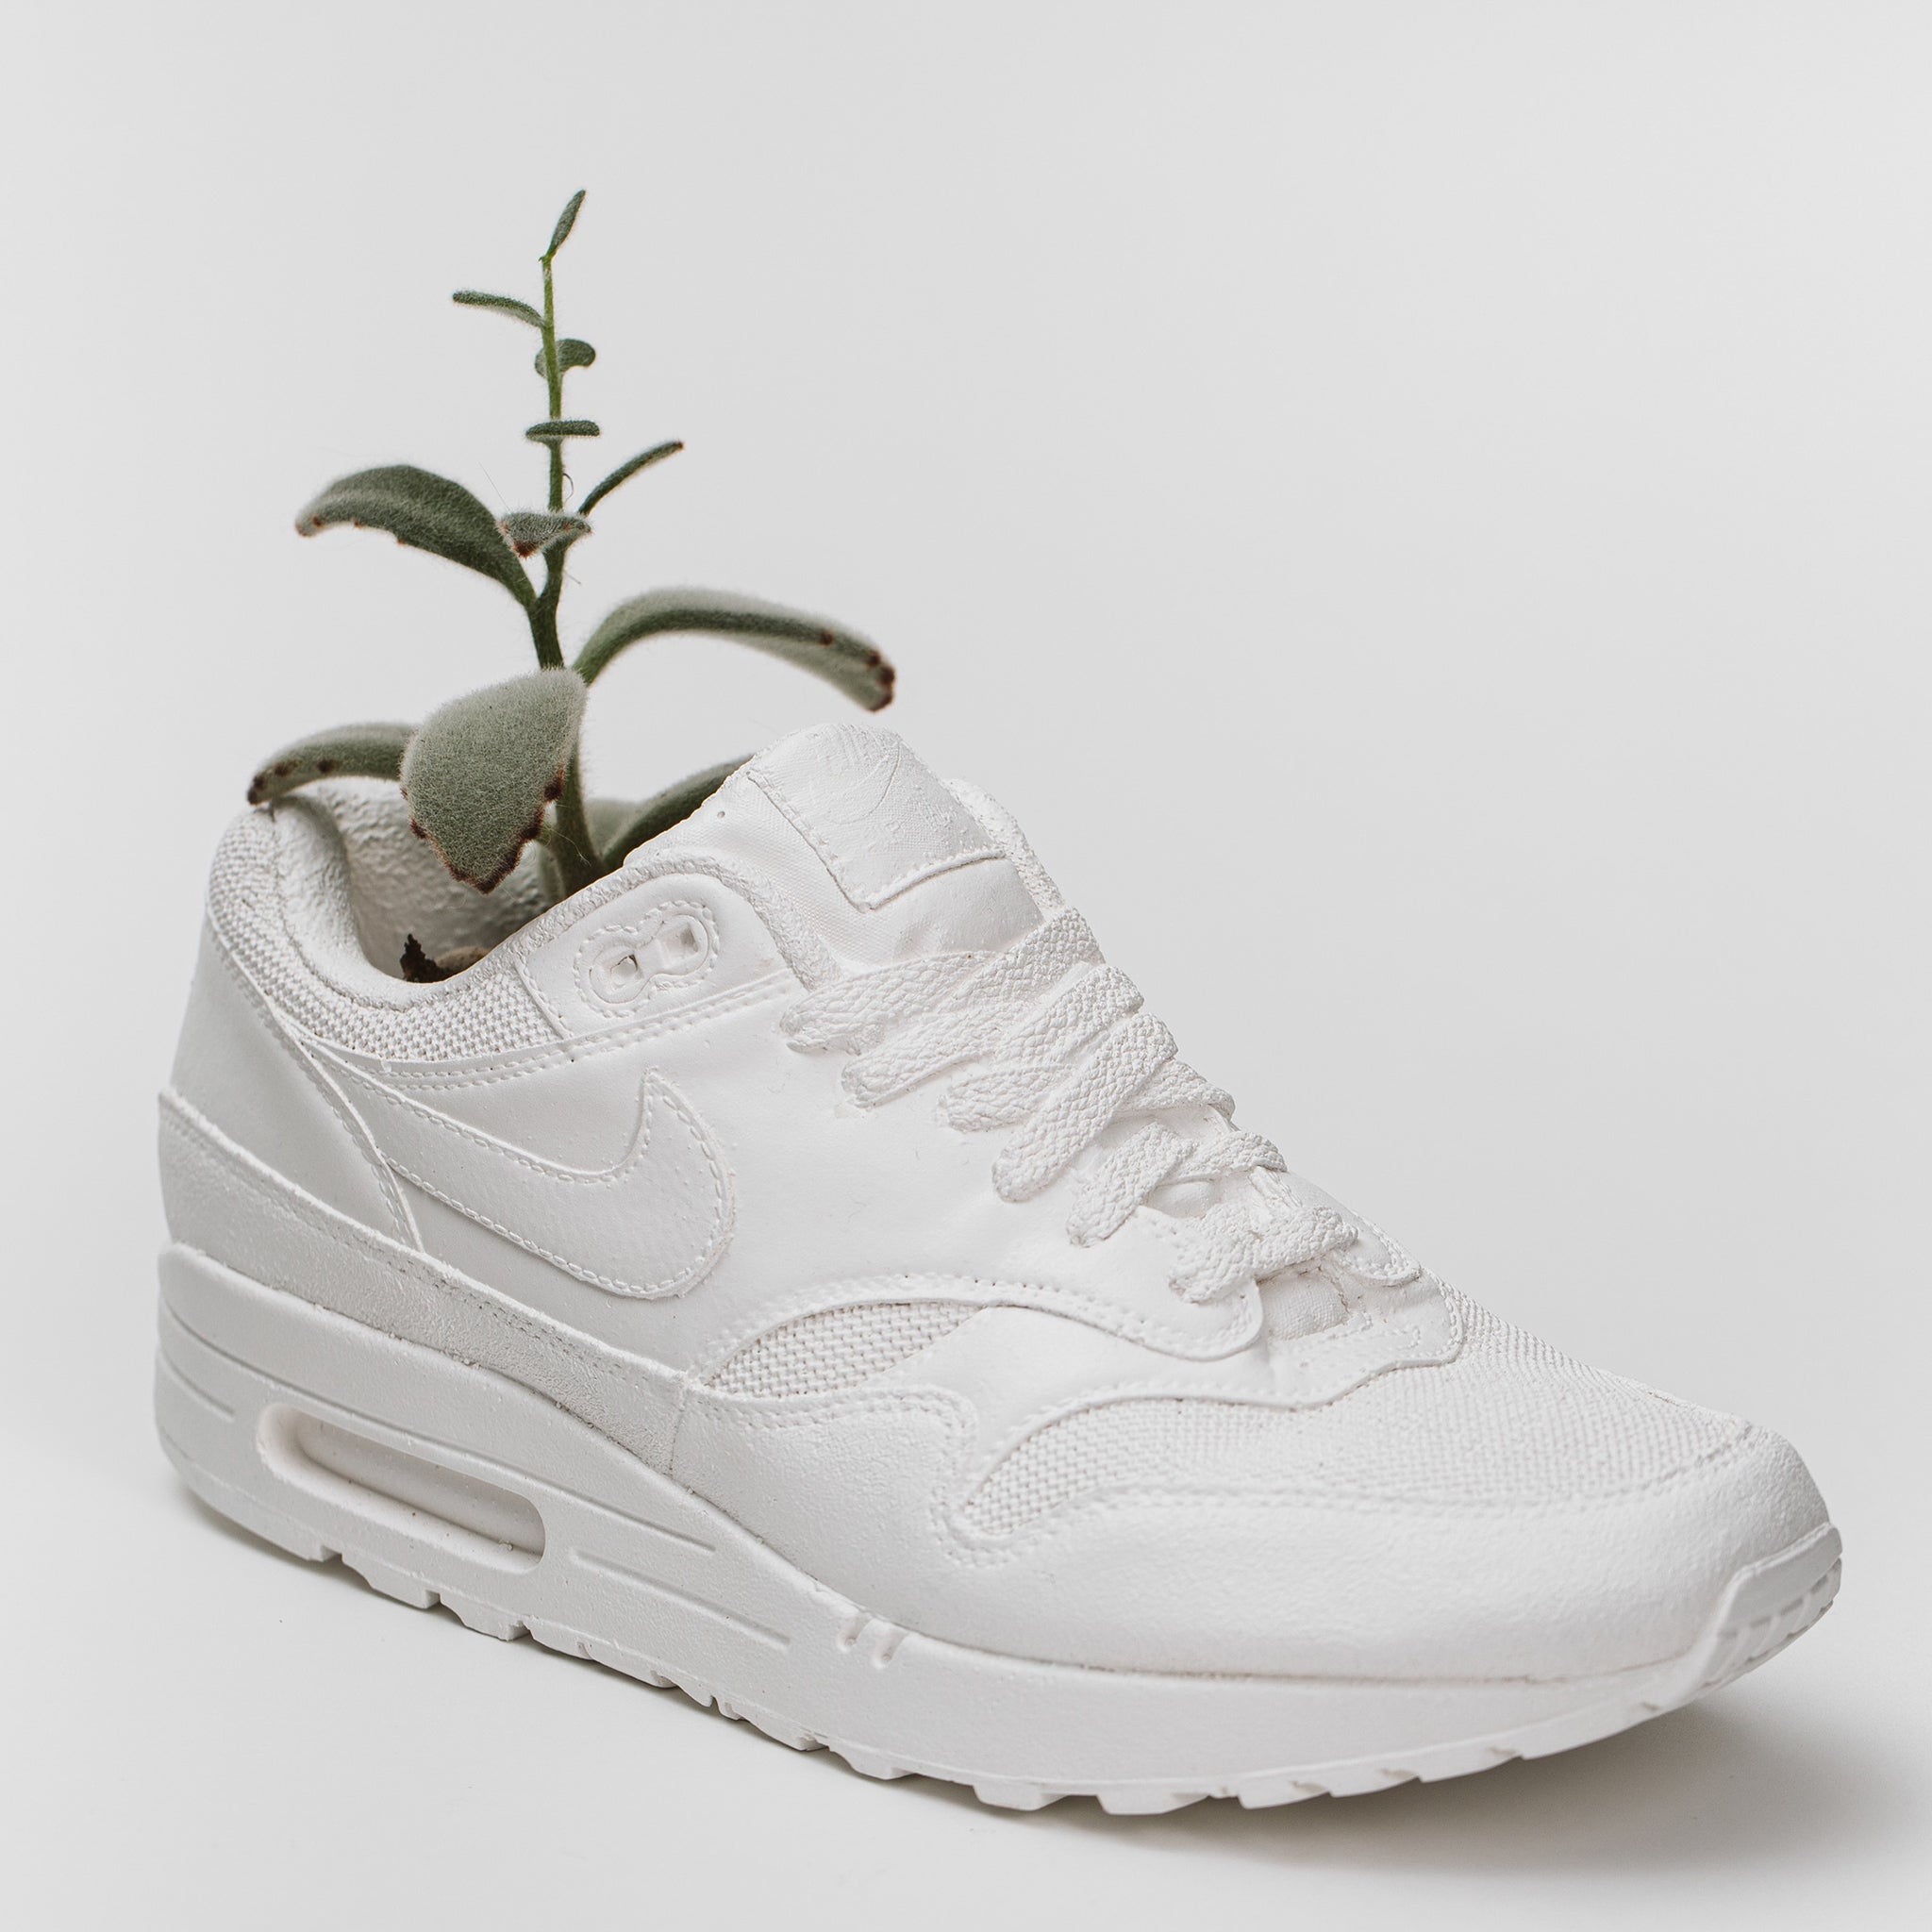 Gypsum stone casted nike air max sneaker planter with a succulent planted in it